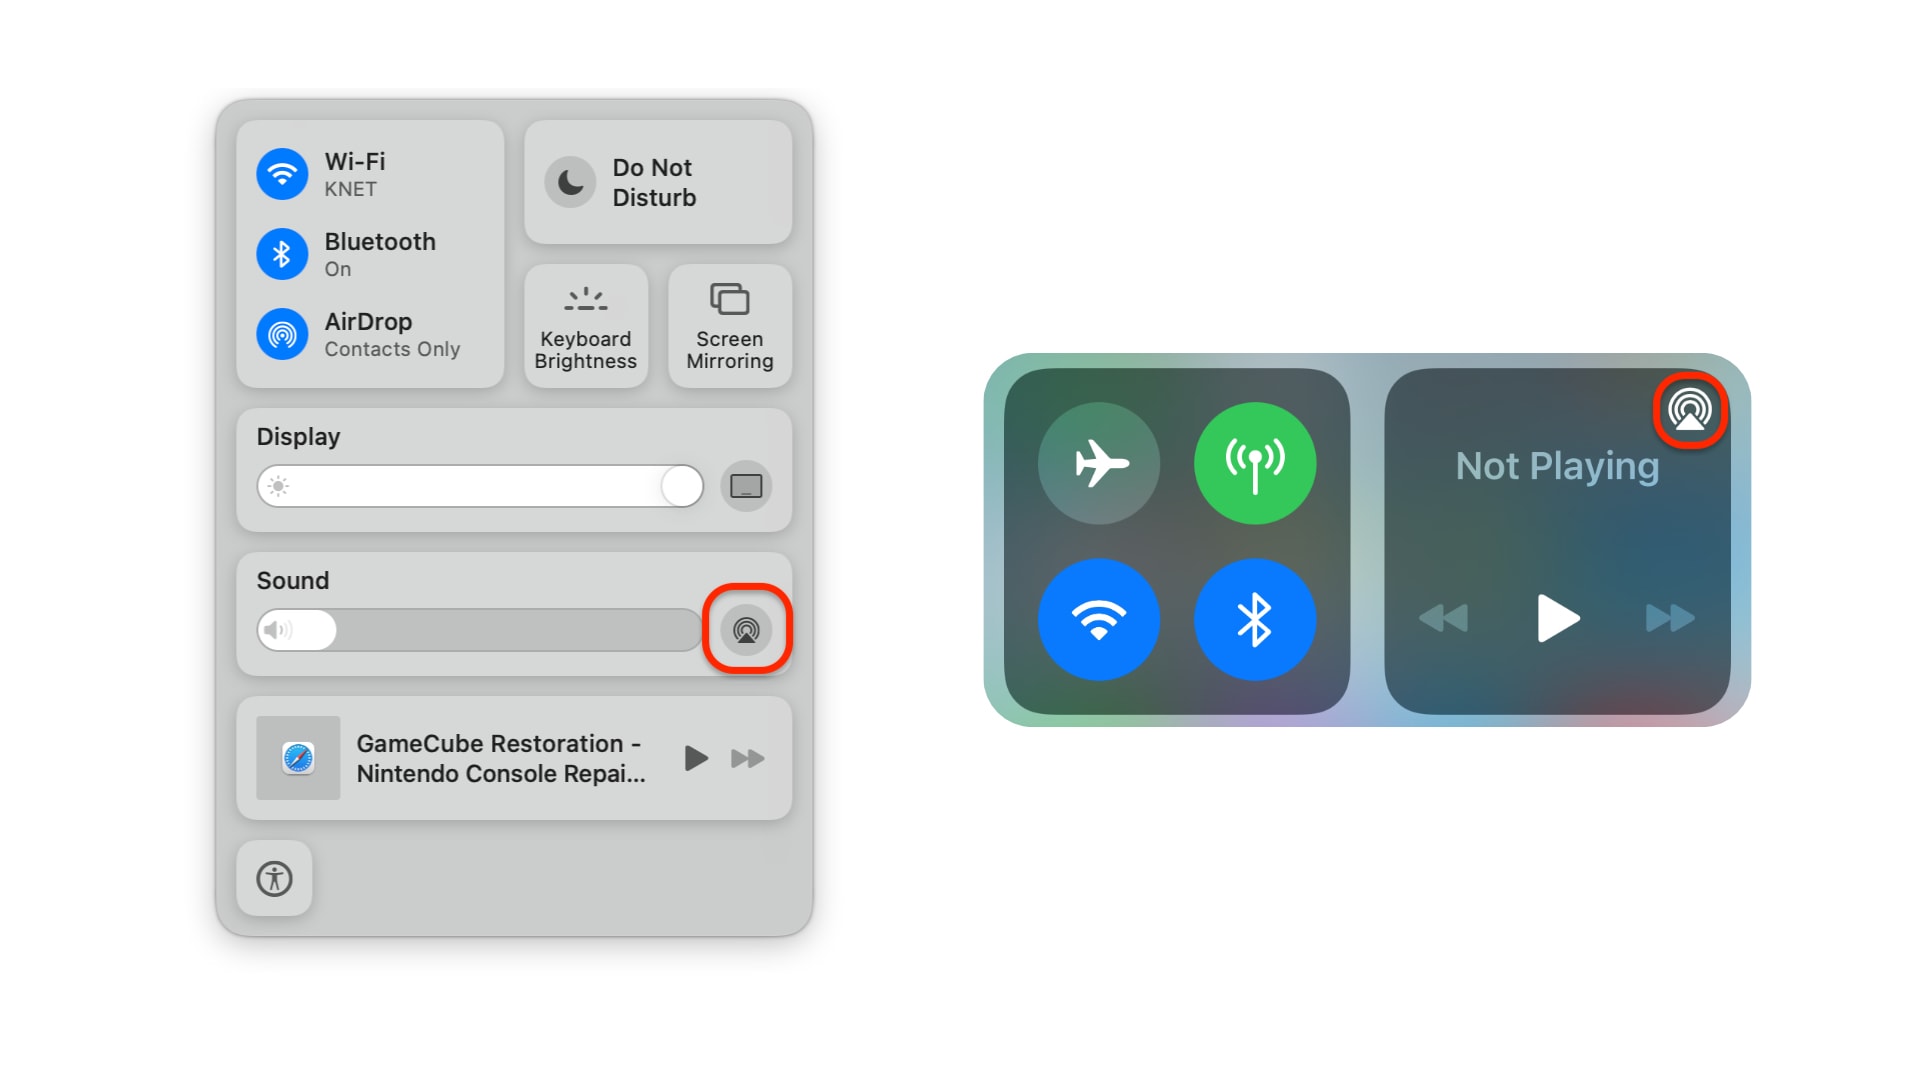 Manage Bluetooth devices in Control Center